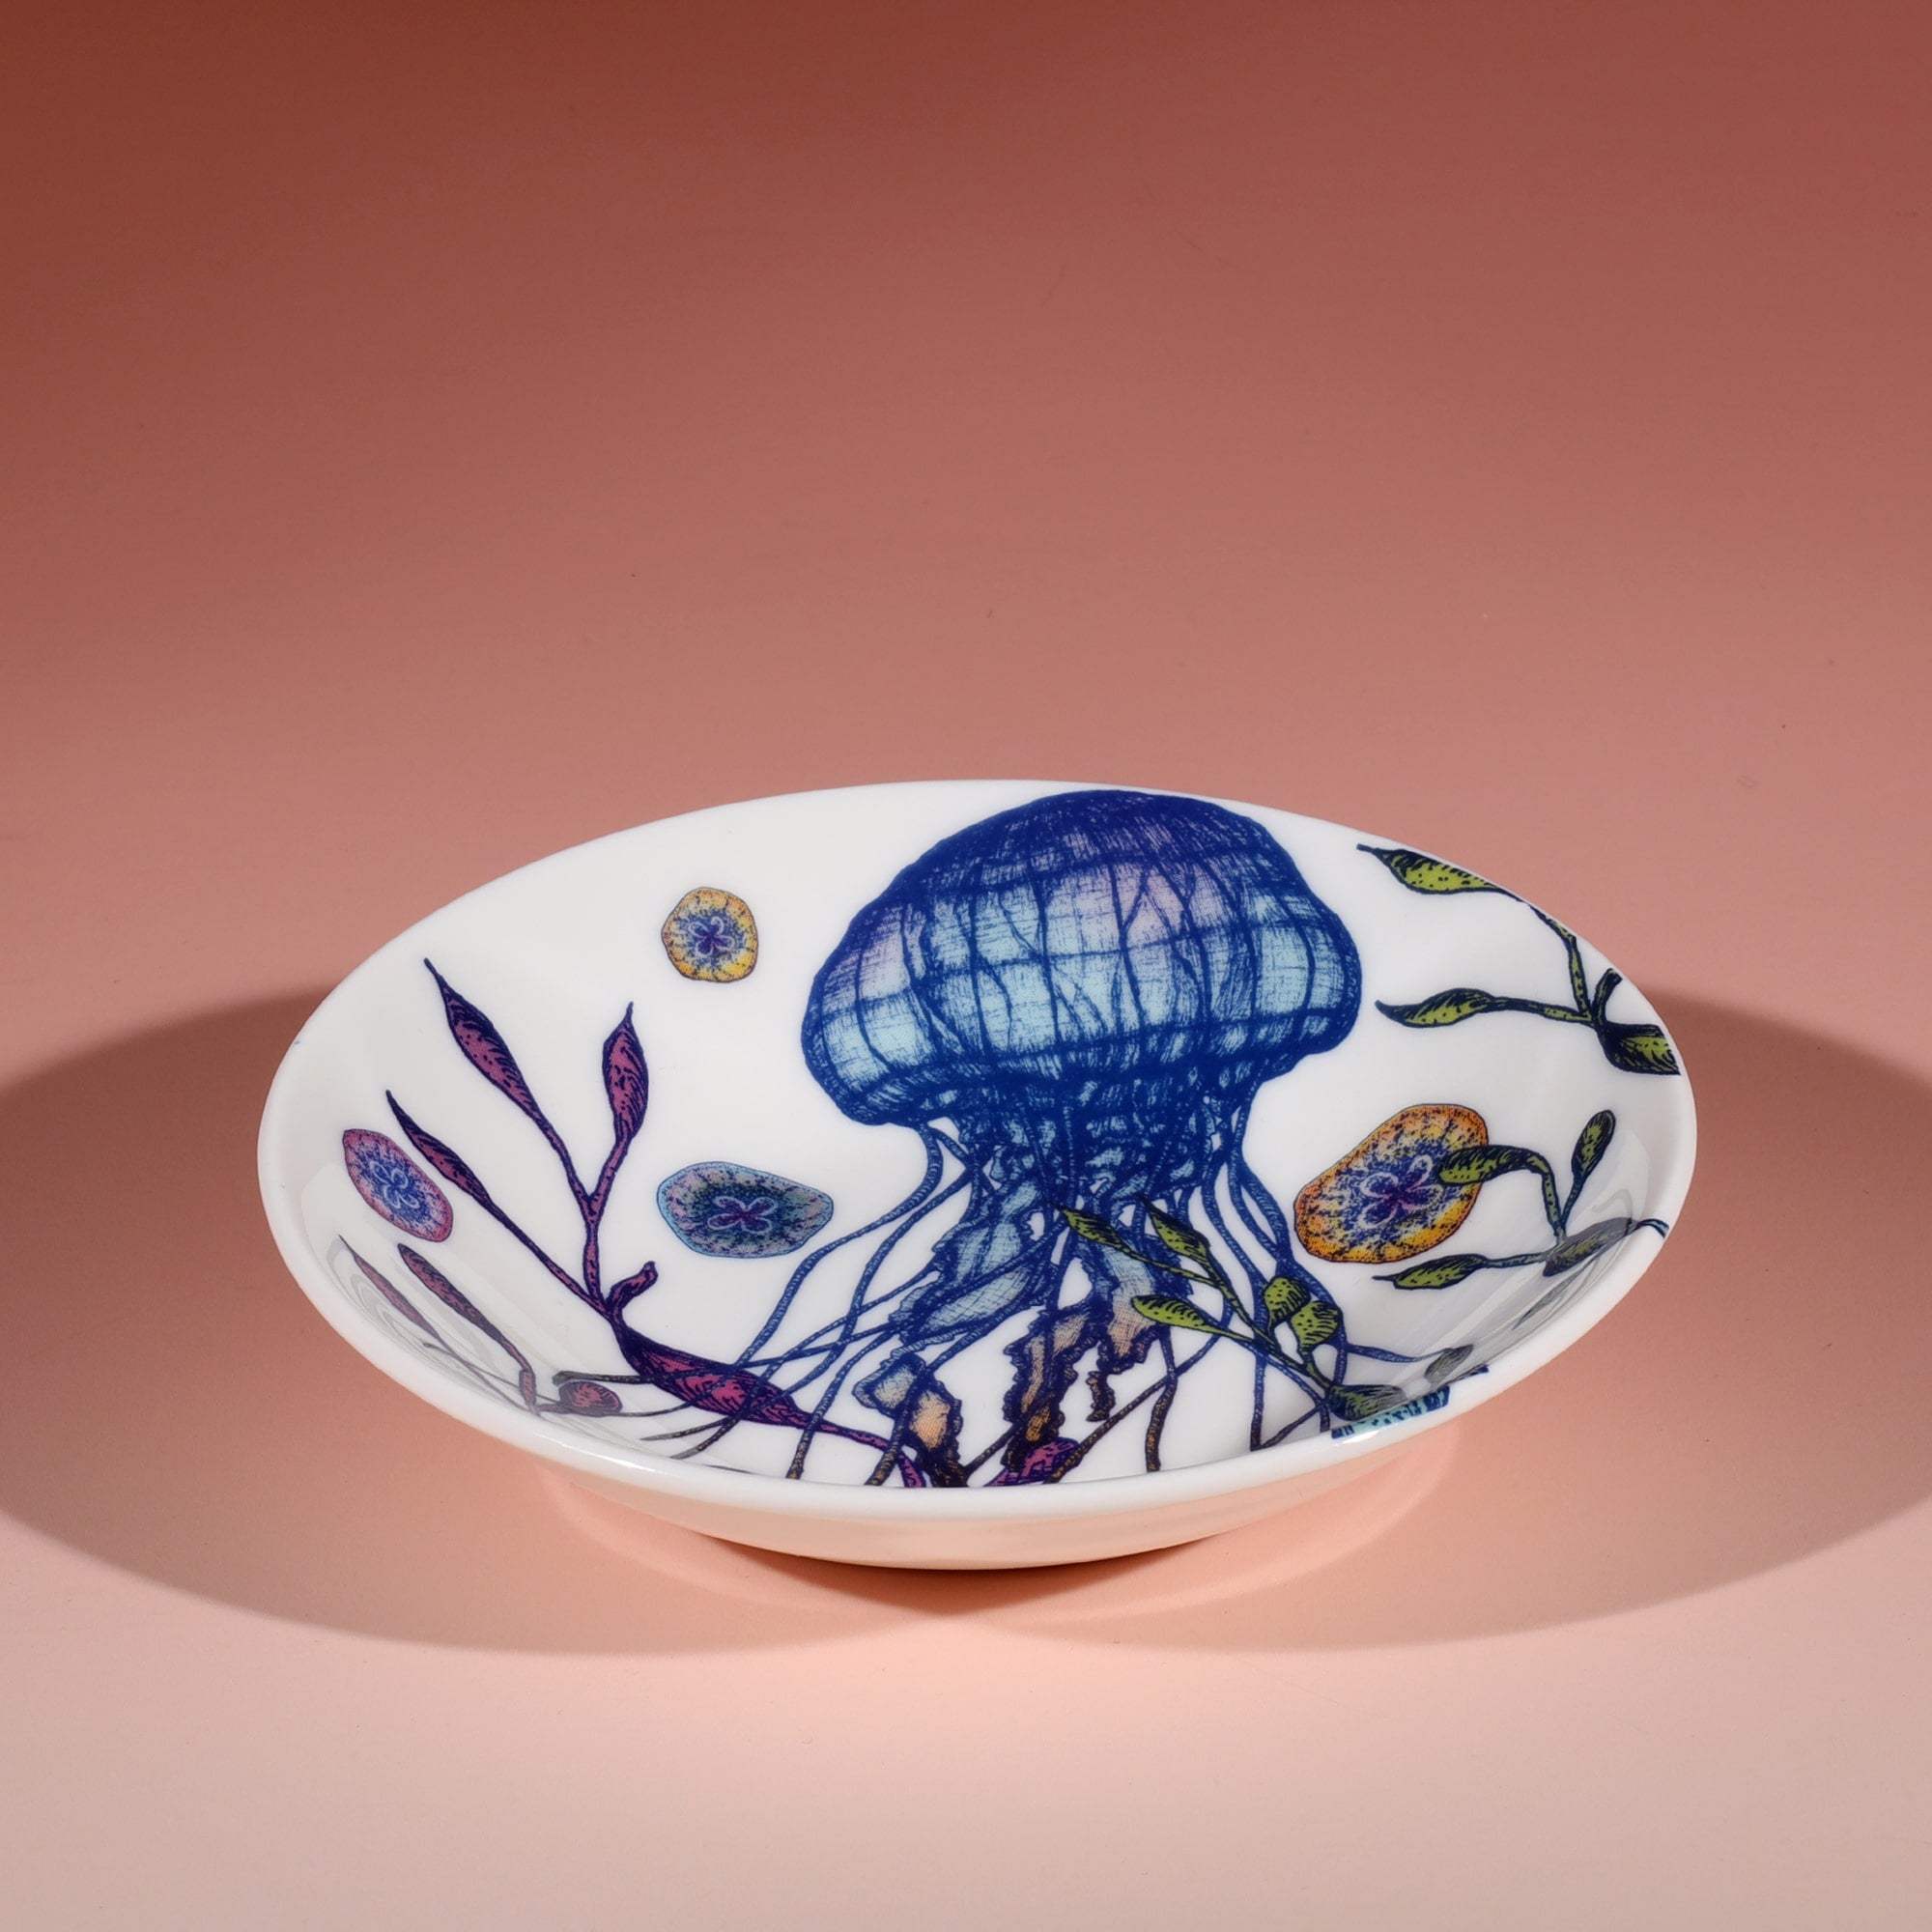 Nibbles bowl in Bone China in our colourful Reef range in the Jellyfish design